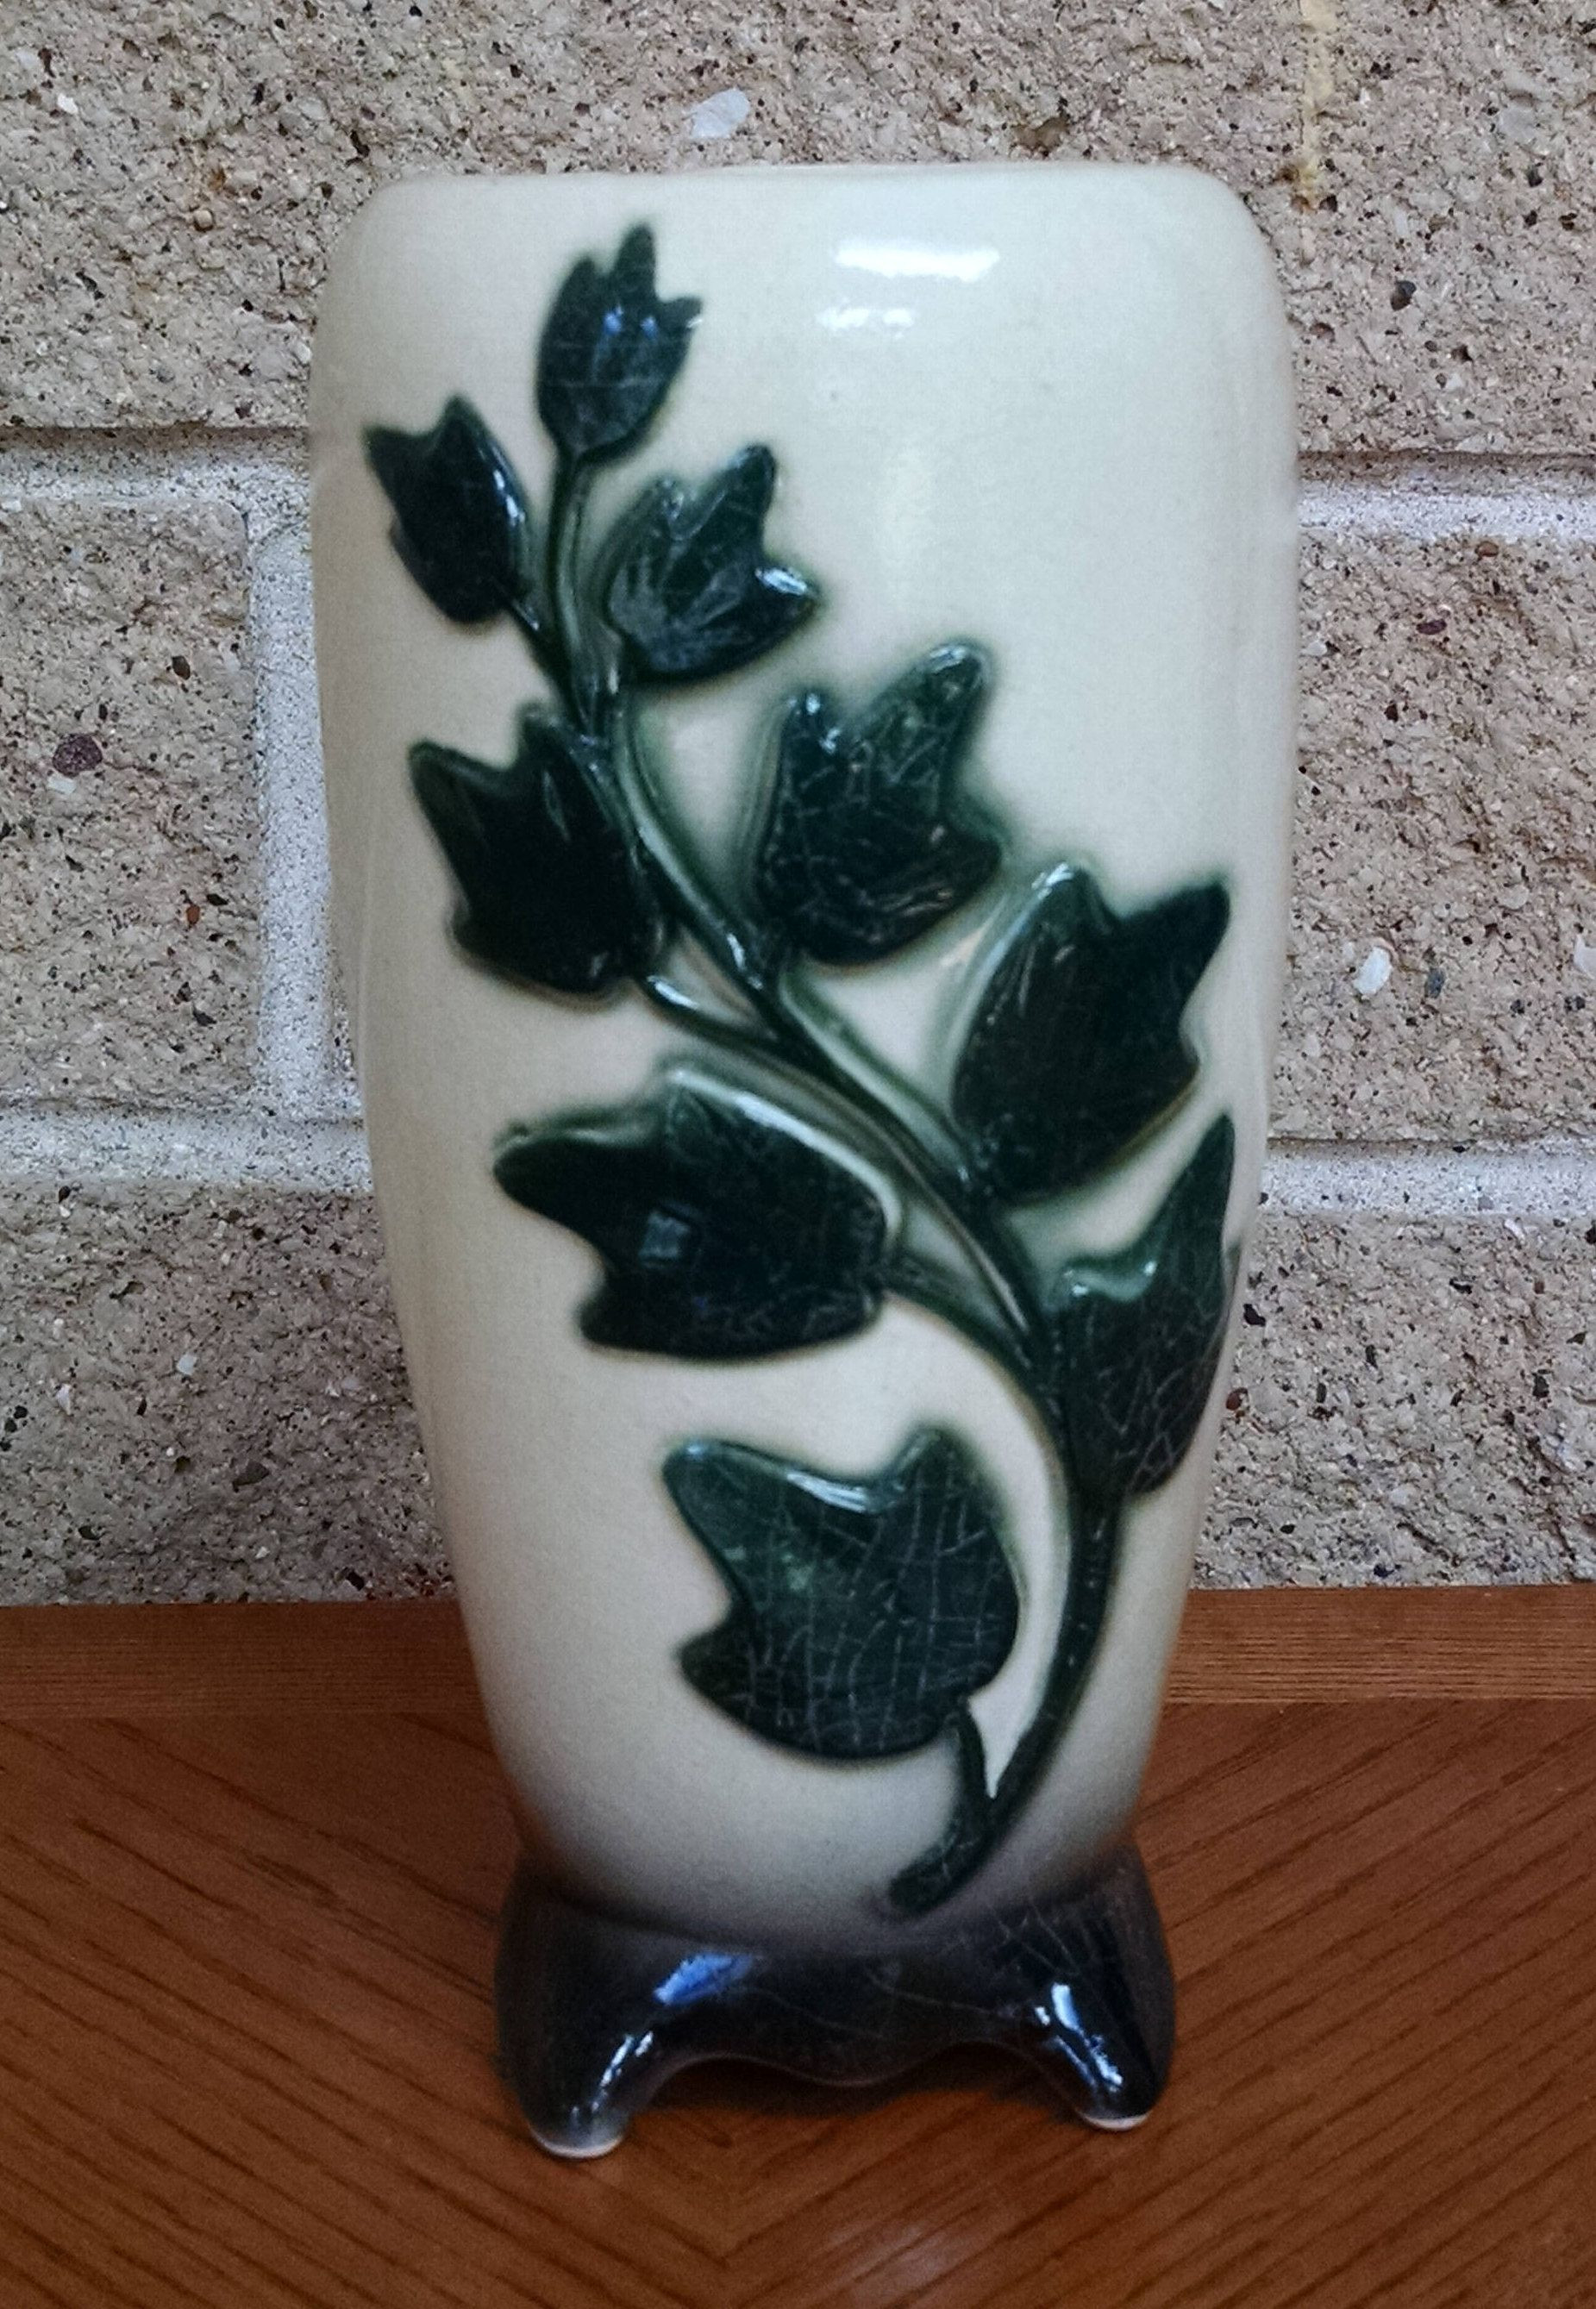 30 Perfect Roseville Blue Vase 2024 free download roseville blue vase of art pottery by becca studio pottery green bowl ebay collectibles for royal copley ivy vase cream and green with black base vintage pottery vase spaulding china collect